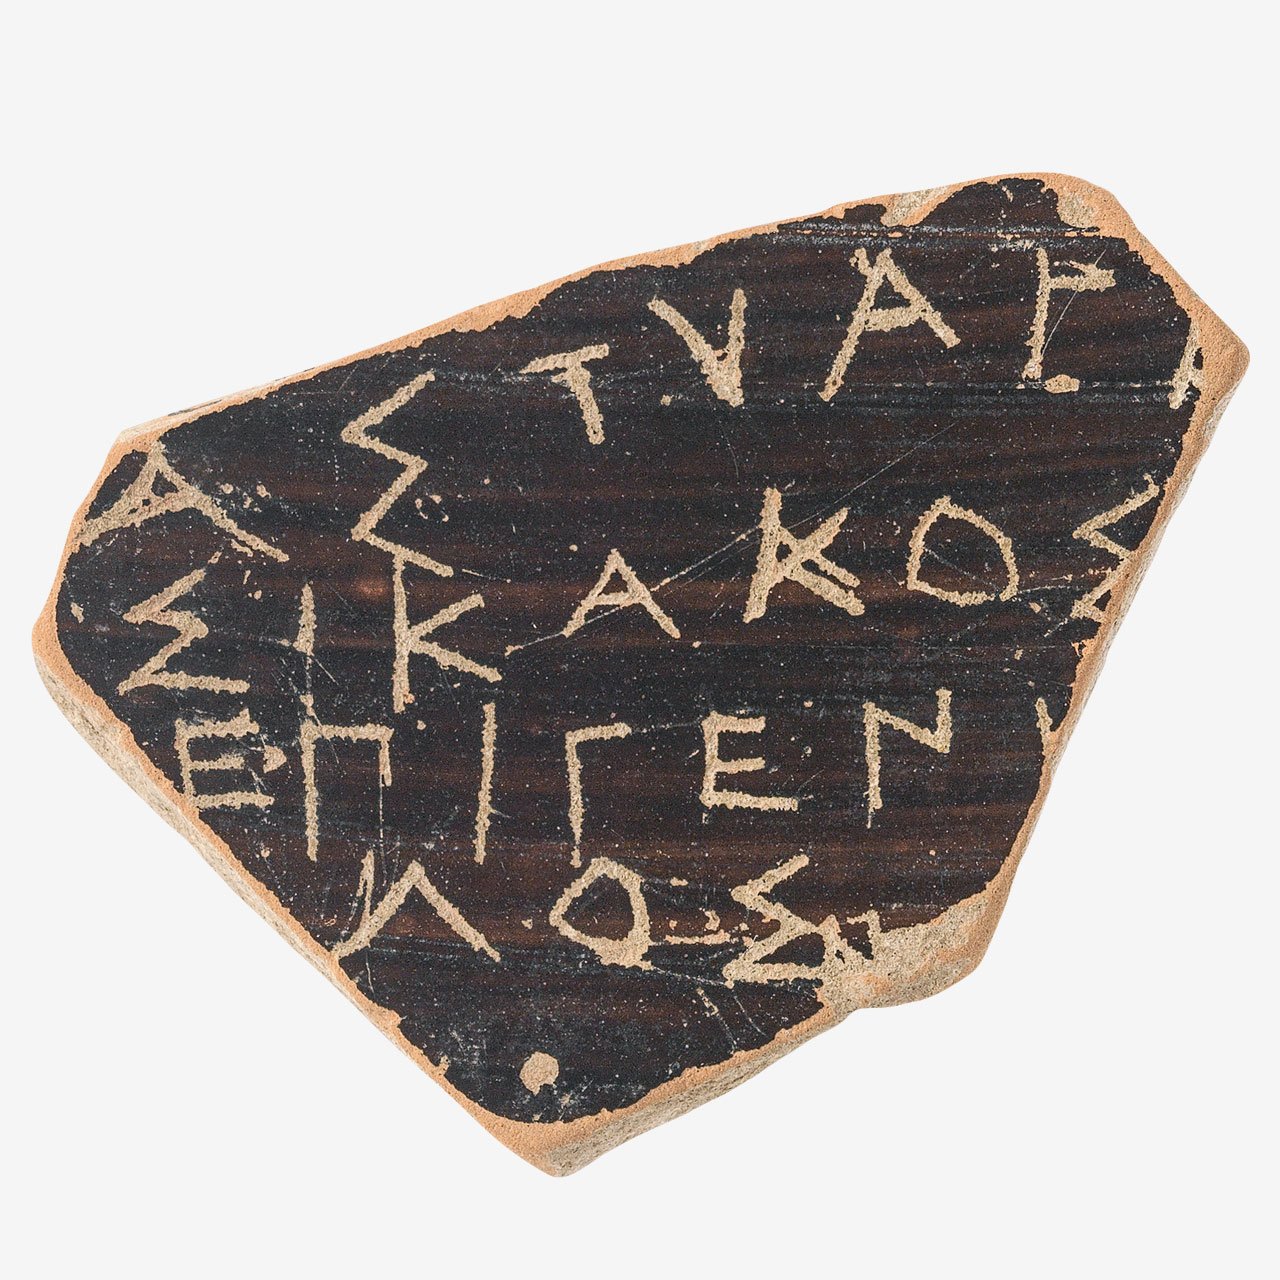 Inscribed sherd of a black-glazed skyphos with the inscription “Astyages is bad, Epigenes is good”. In the initial writing Astyages was characterized as καλός (good, worthy, handsome), which epithet was subsequently changed to the opposite, κακός (bad).